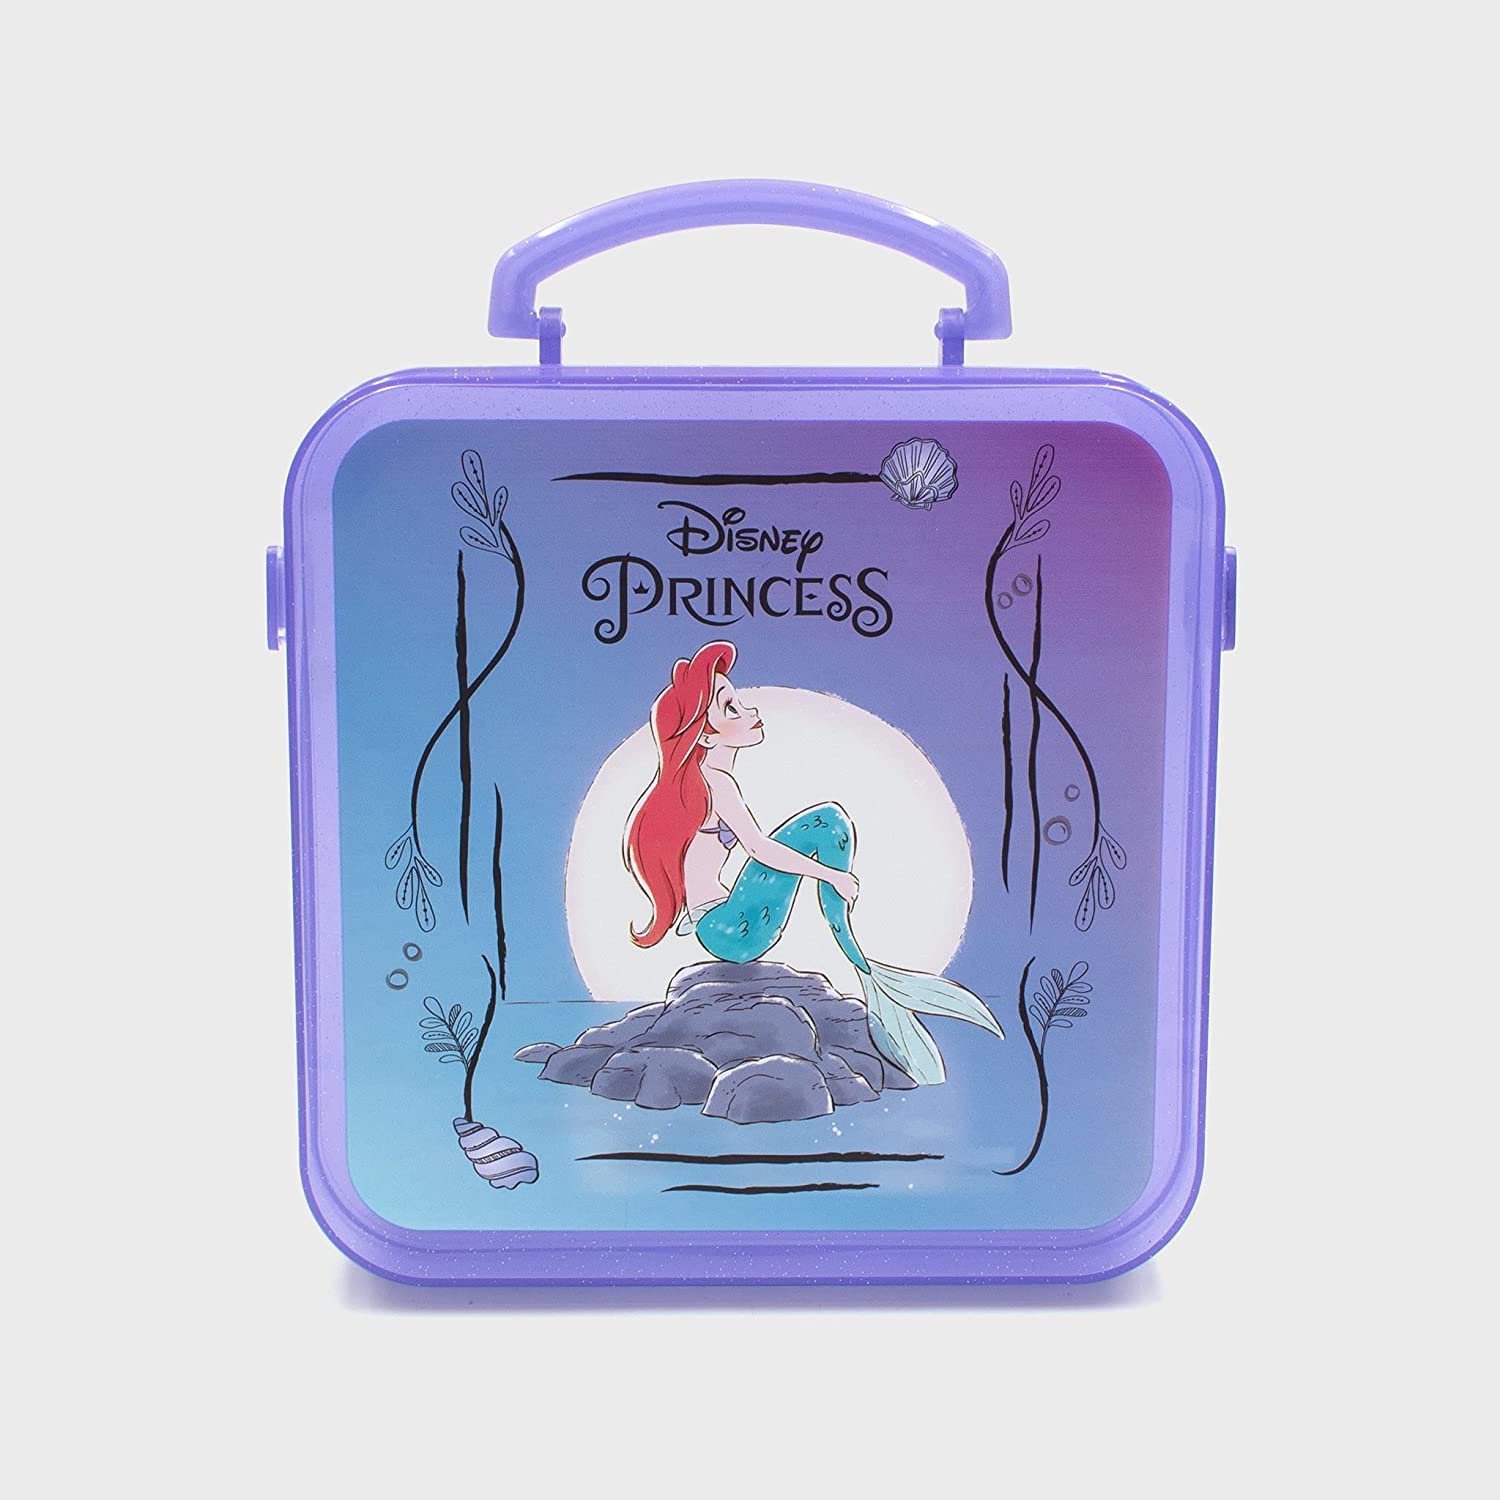 Disney Princess Little Mermaid Lunch Box - Empty – Rex Distributor, Inc.  Wholesale Licensed Products and T-shirts, Sporting goods